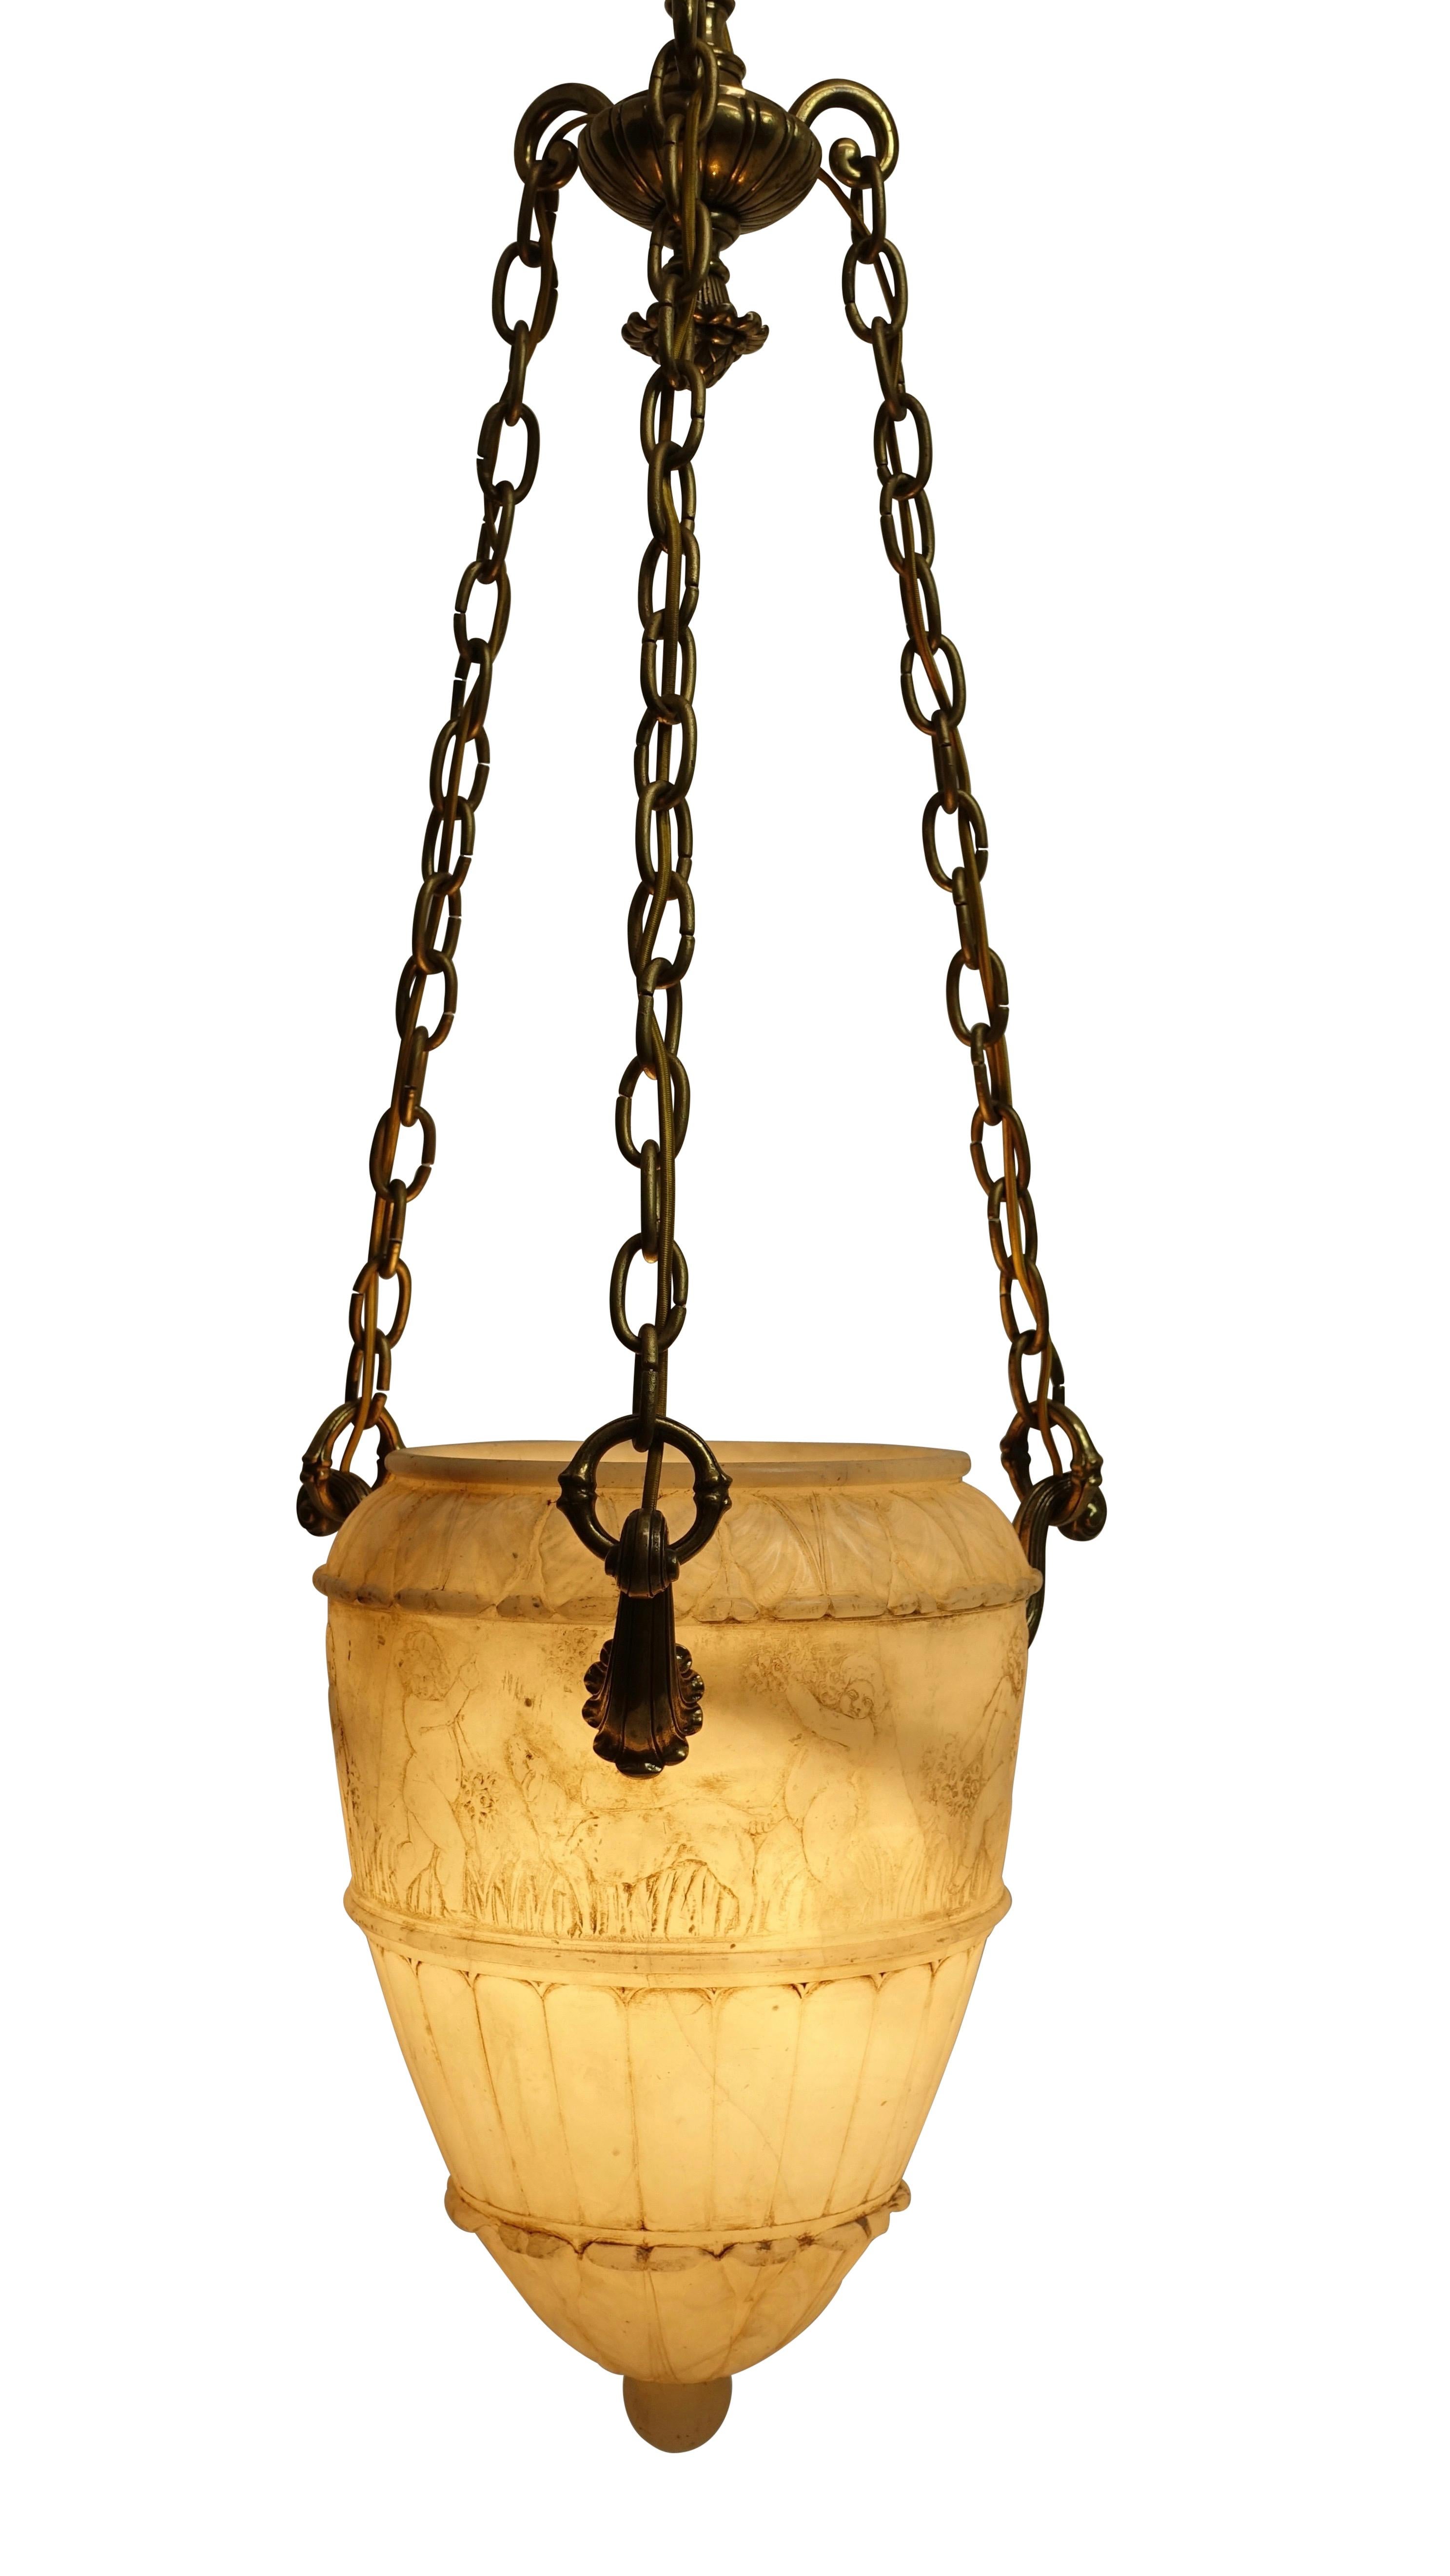 20th Century Carved Alabaster Pendant Light Fixture with Brass Hardware, Italian, circa 1910 For Sale